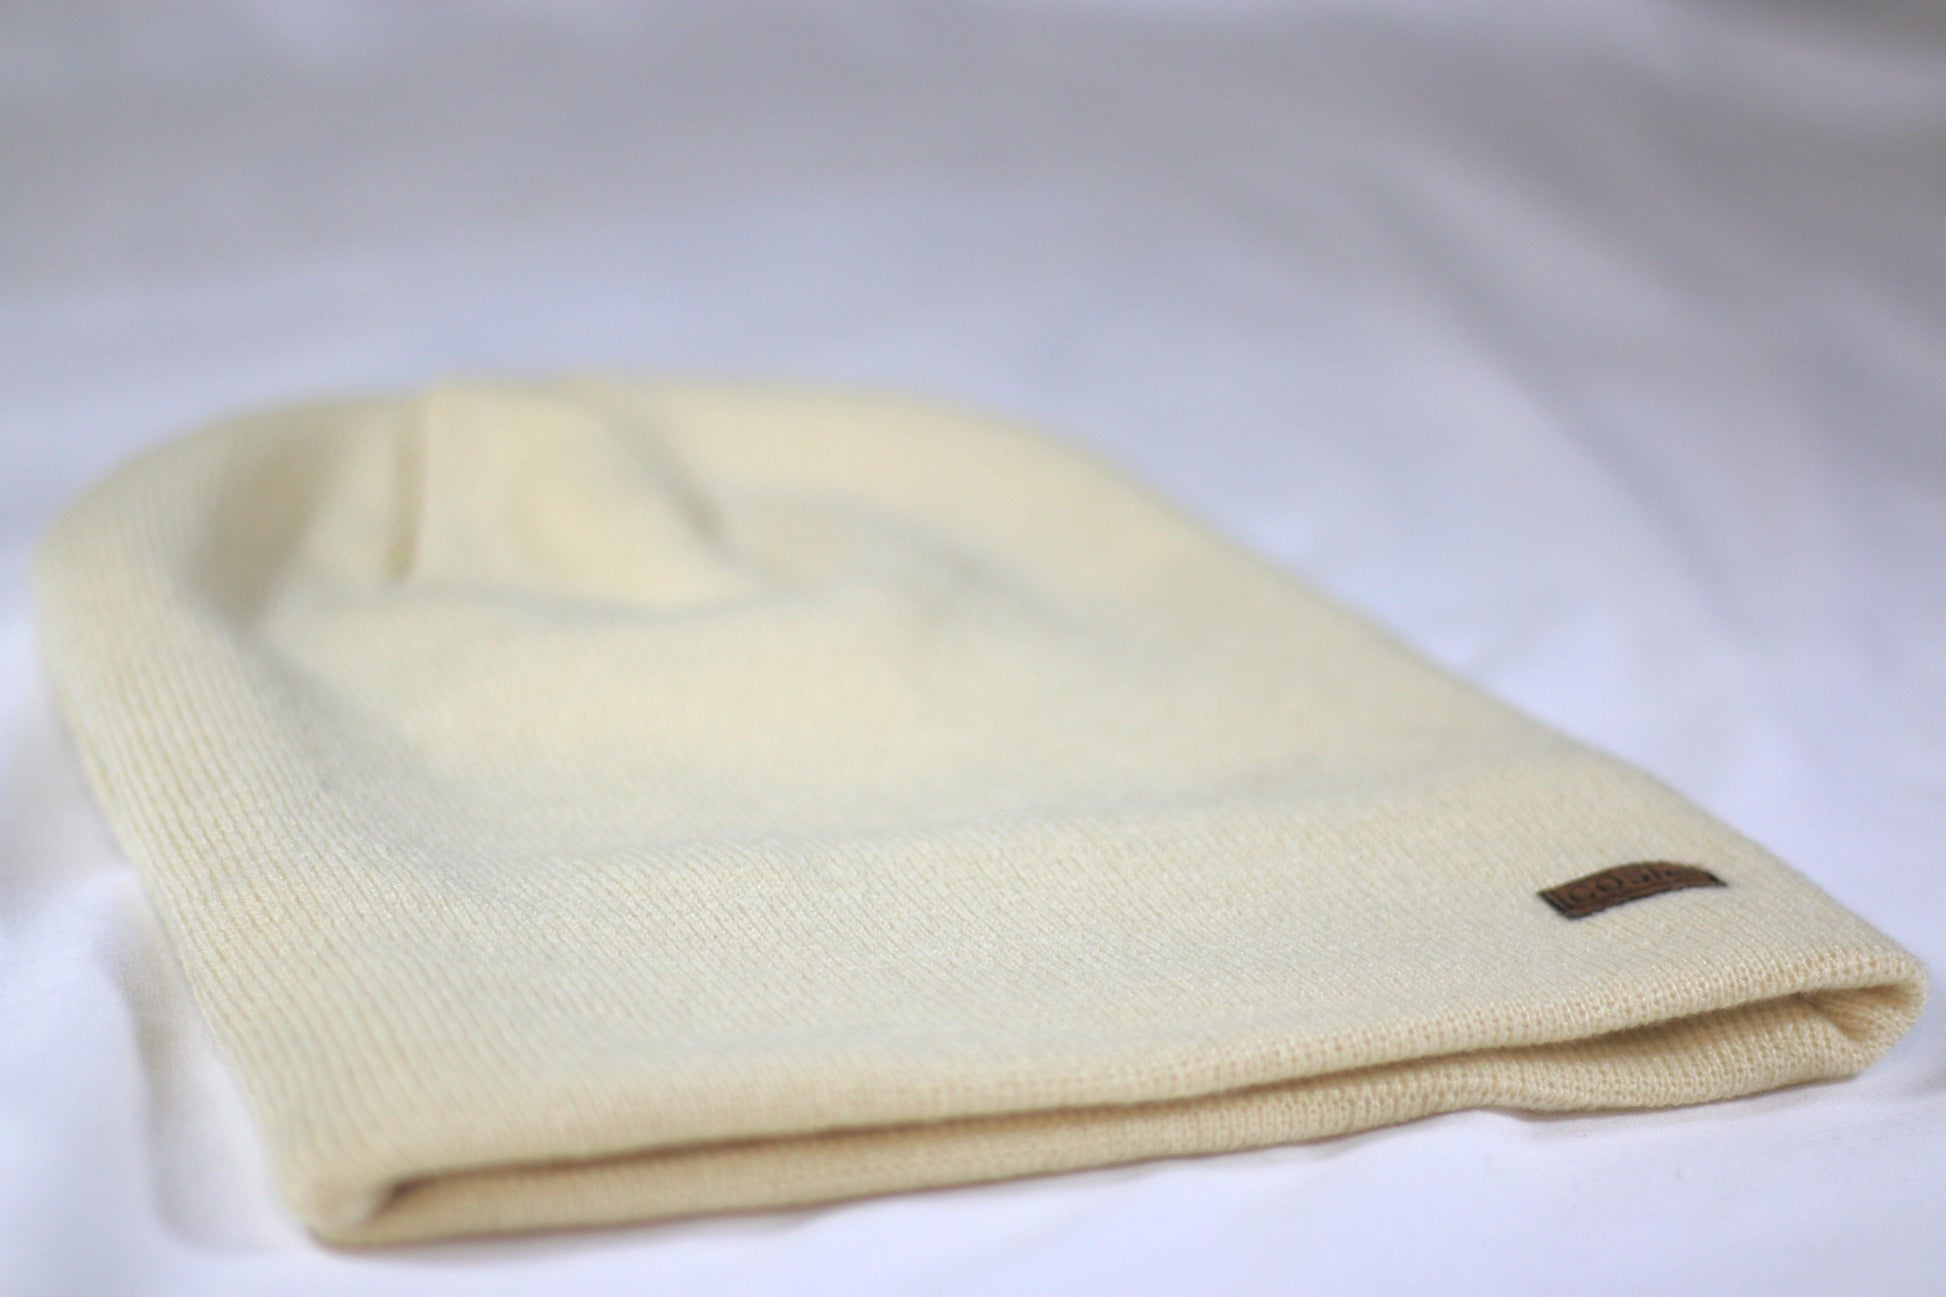 The Slouch in Cream - COSI & co.